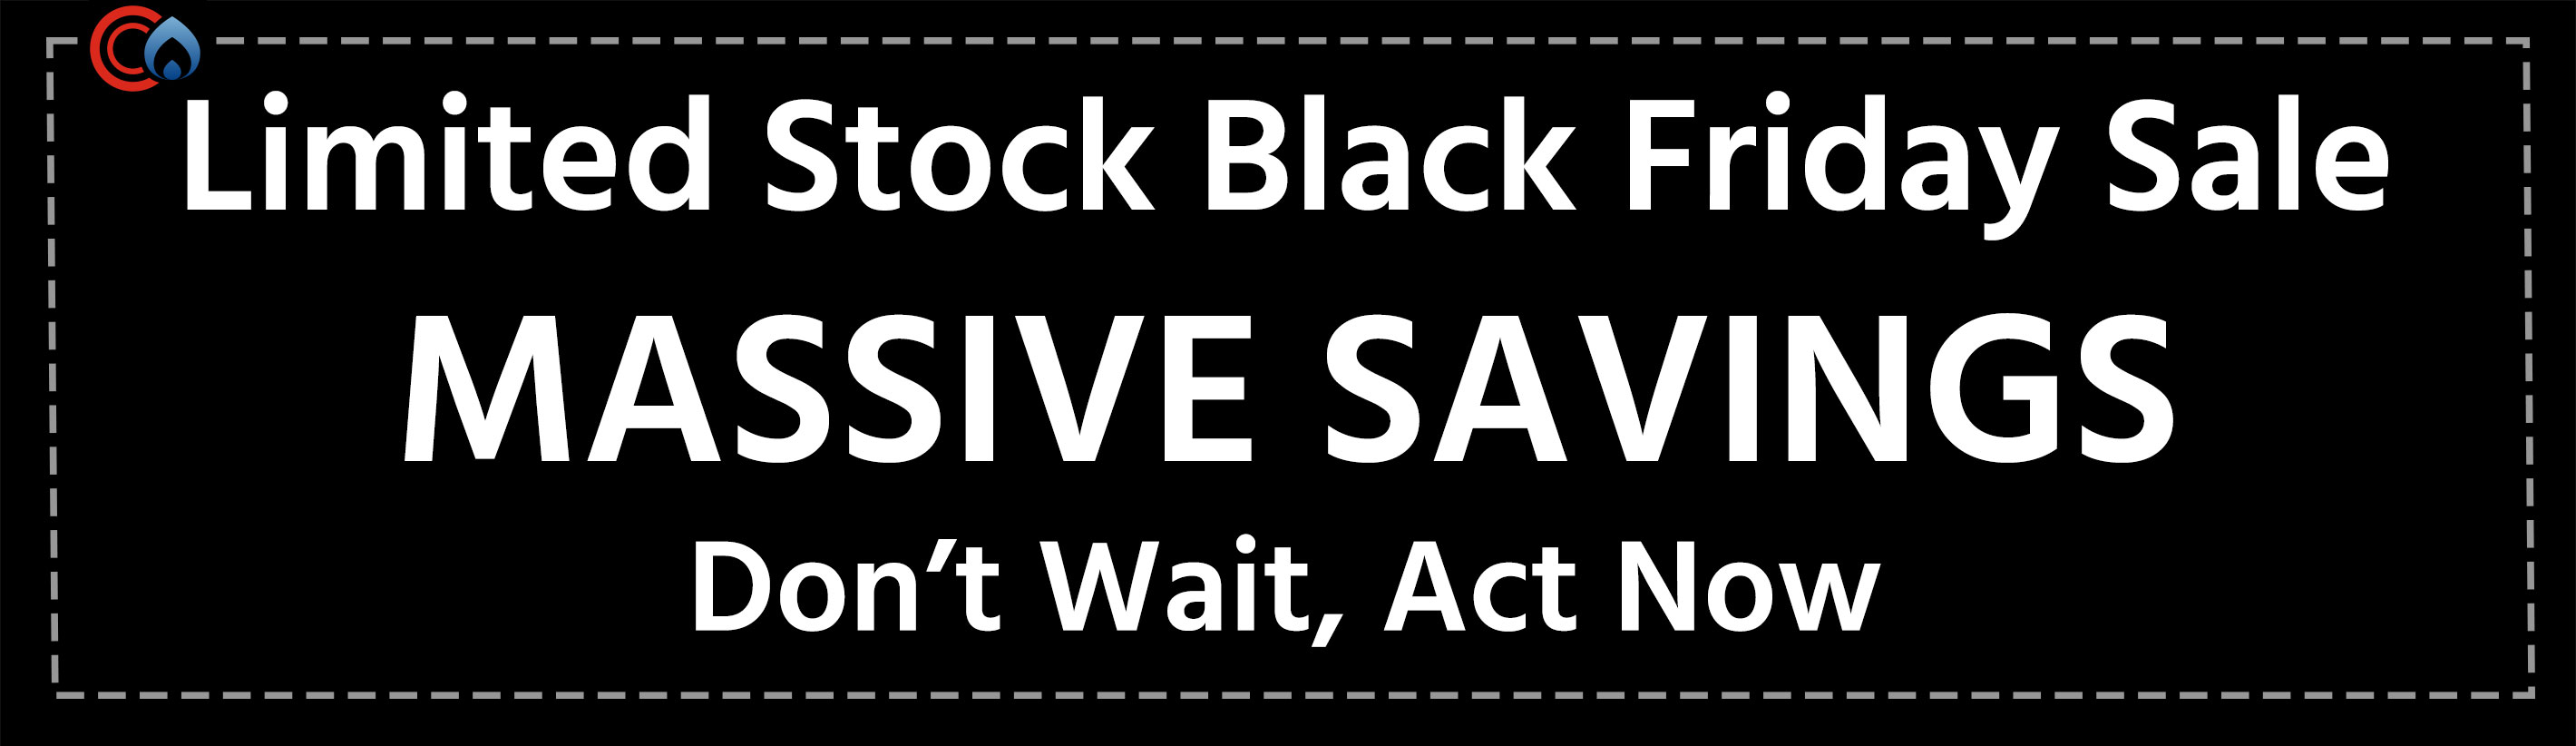 Black Friday, Massive Savings on Limited Stock, Don't wait, act now